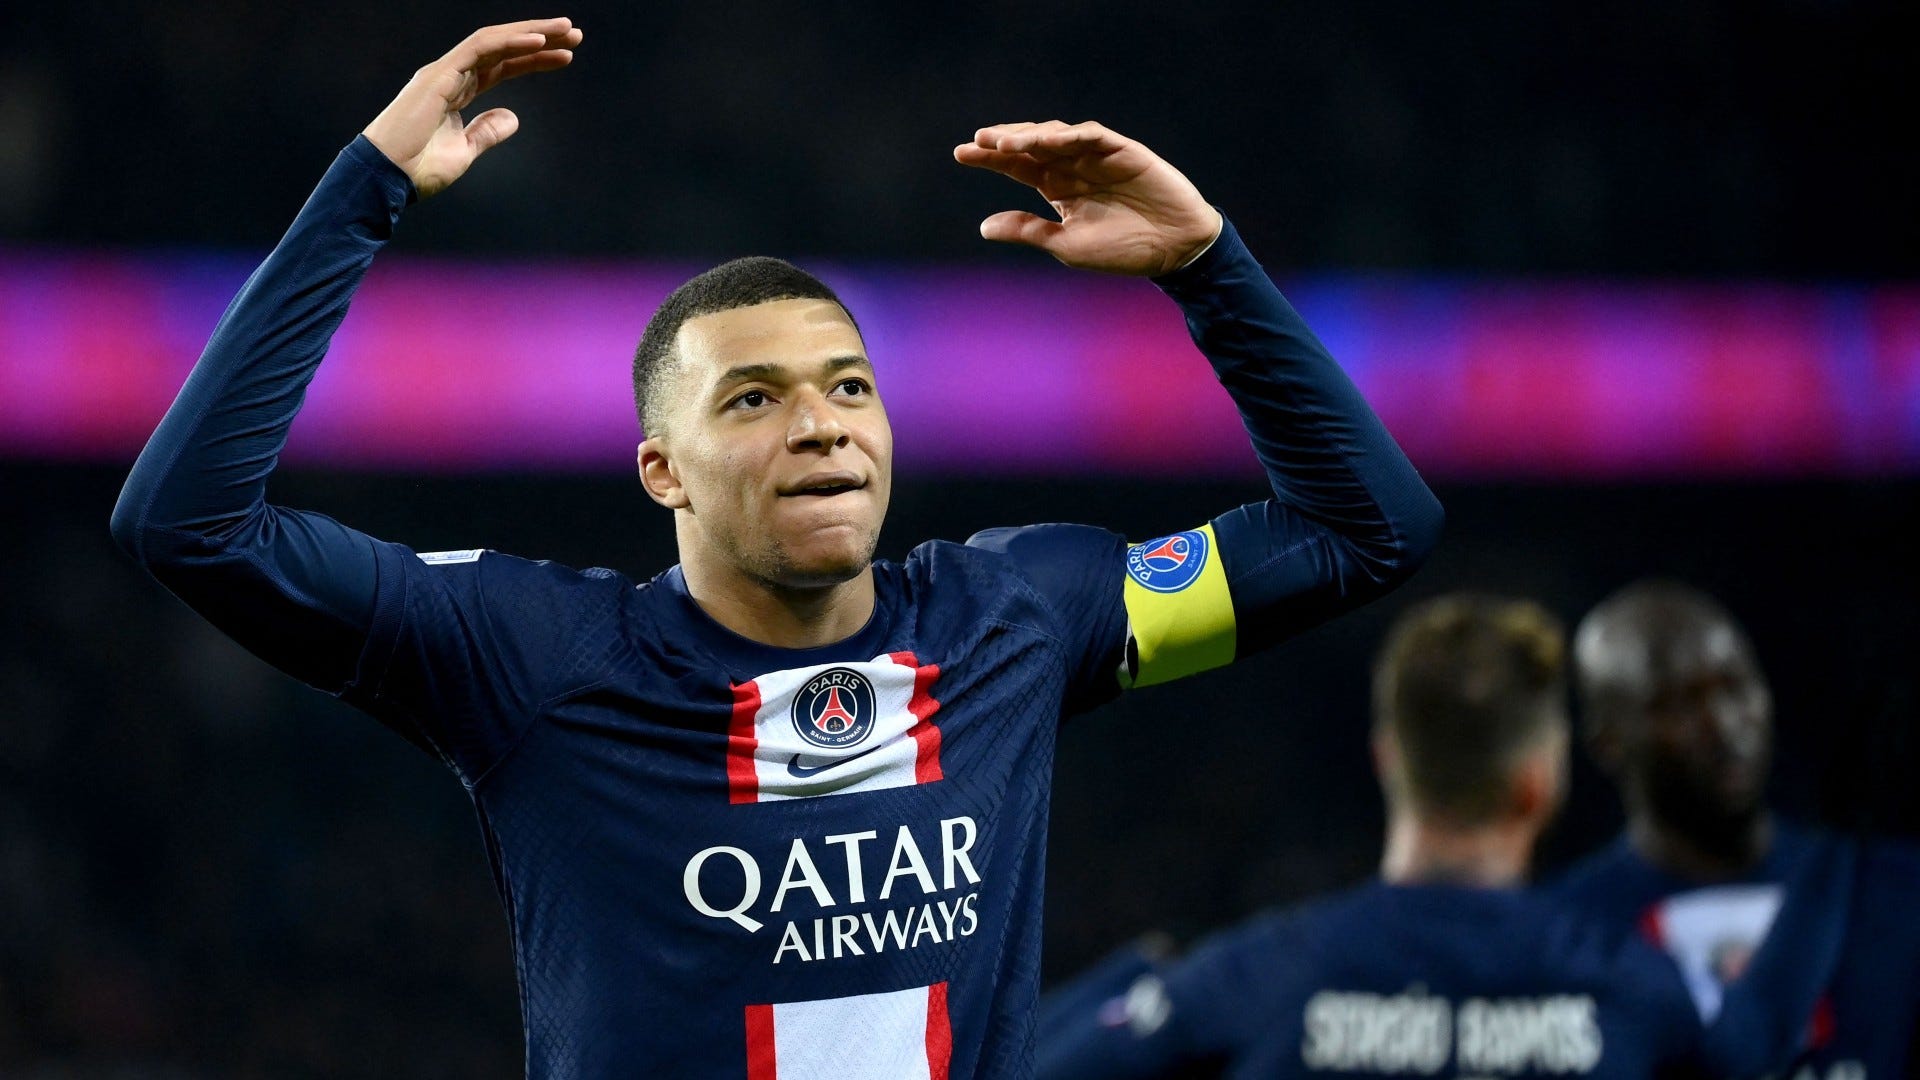 PSG vs Lyon Where to watch the match online, live stream, TV channels and kick-off time Goal